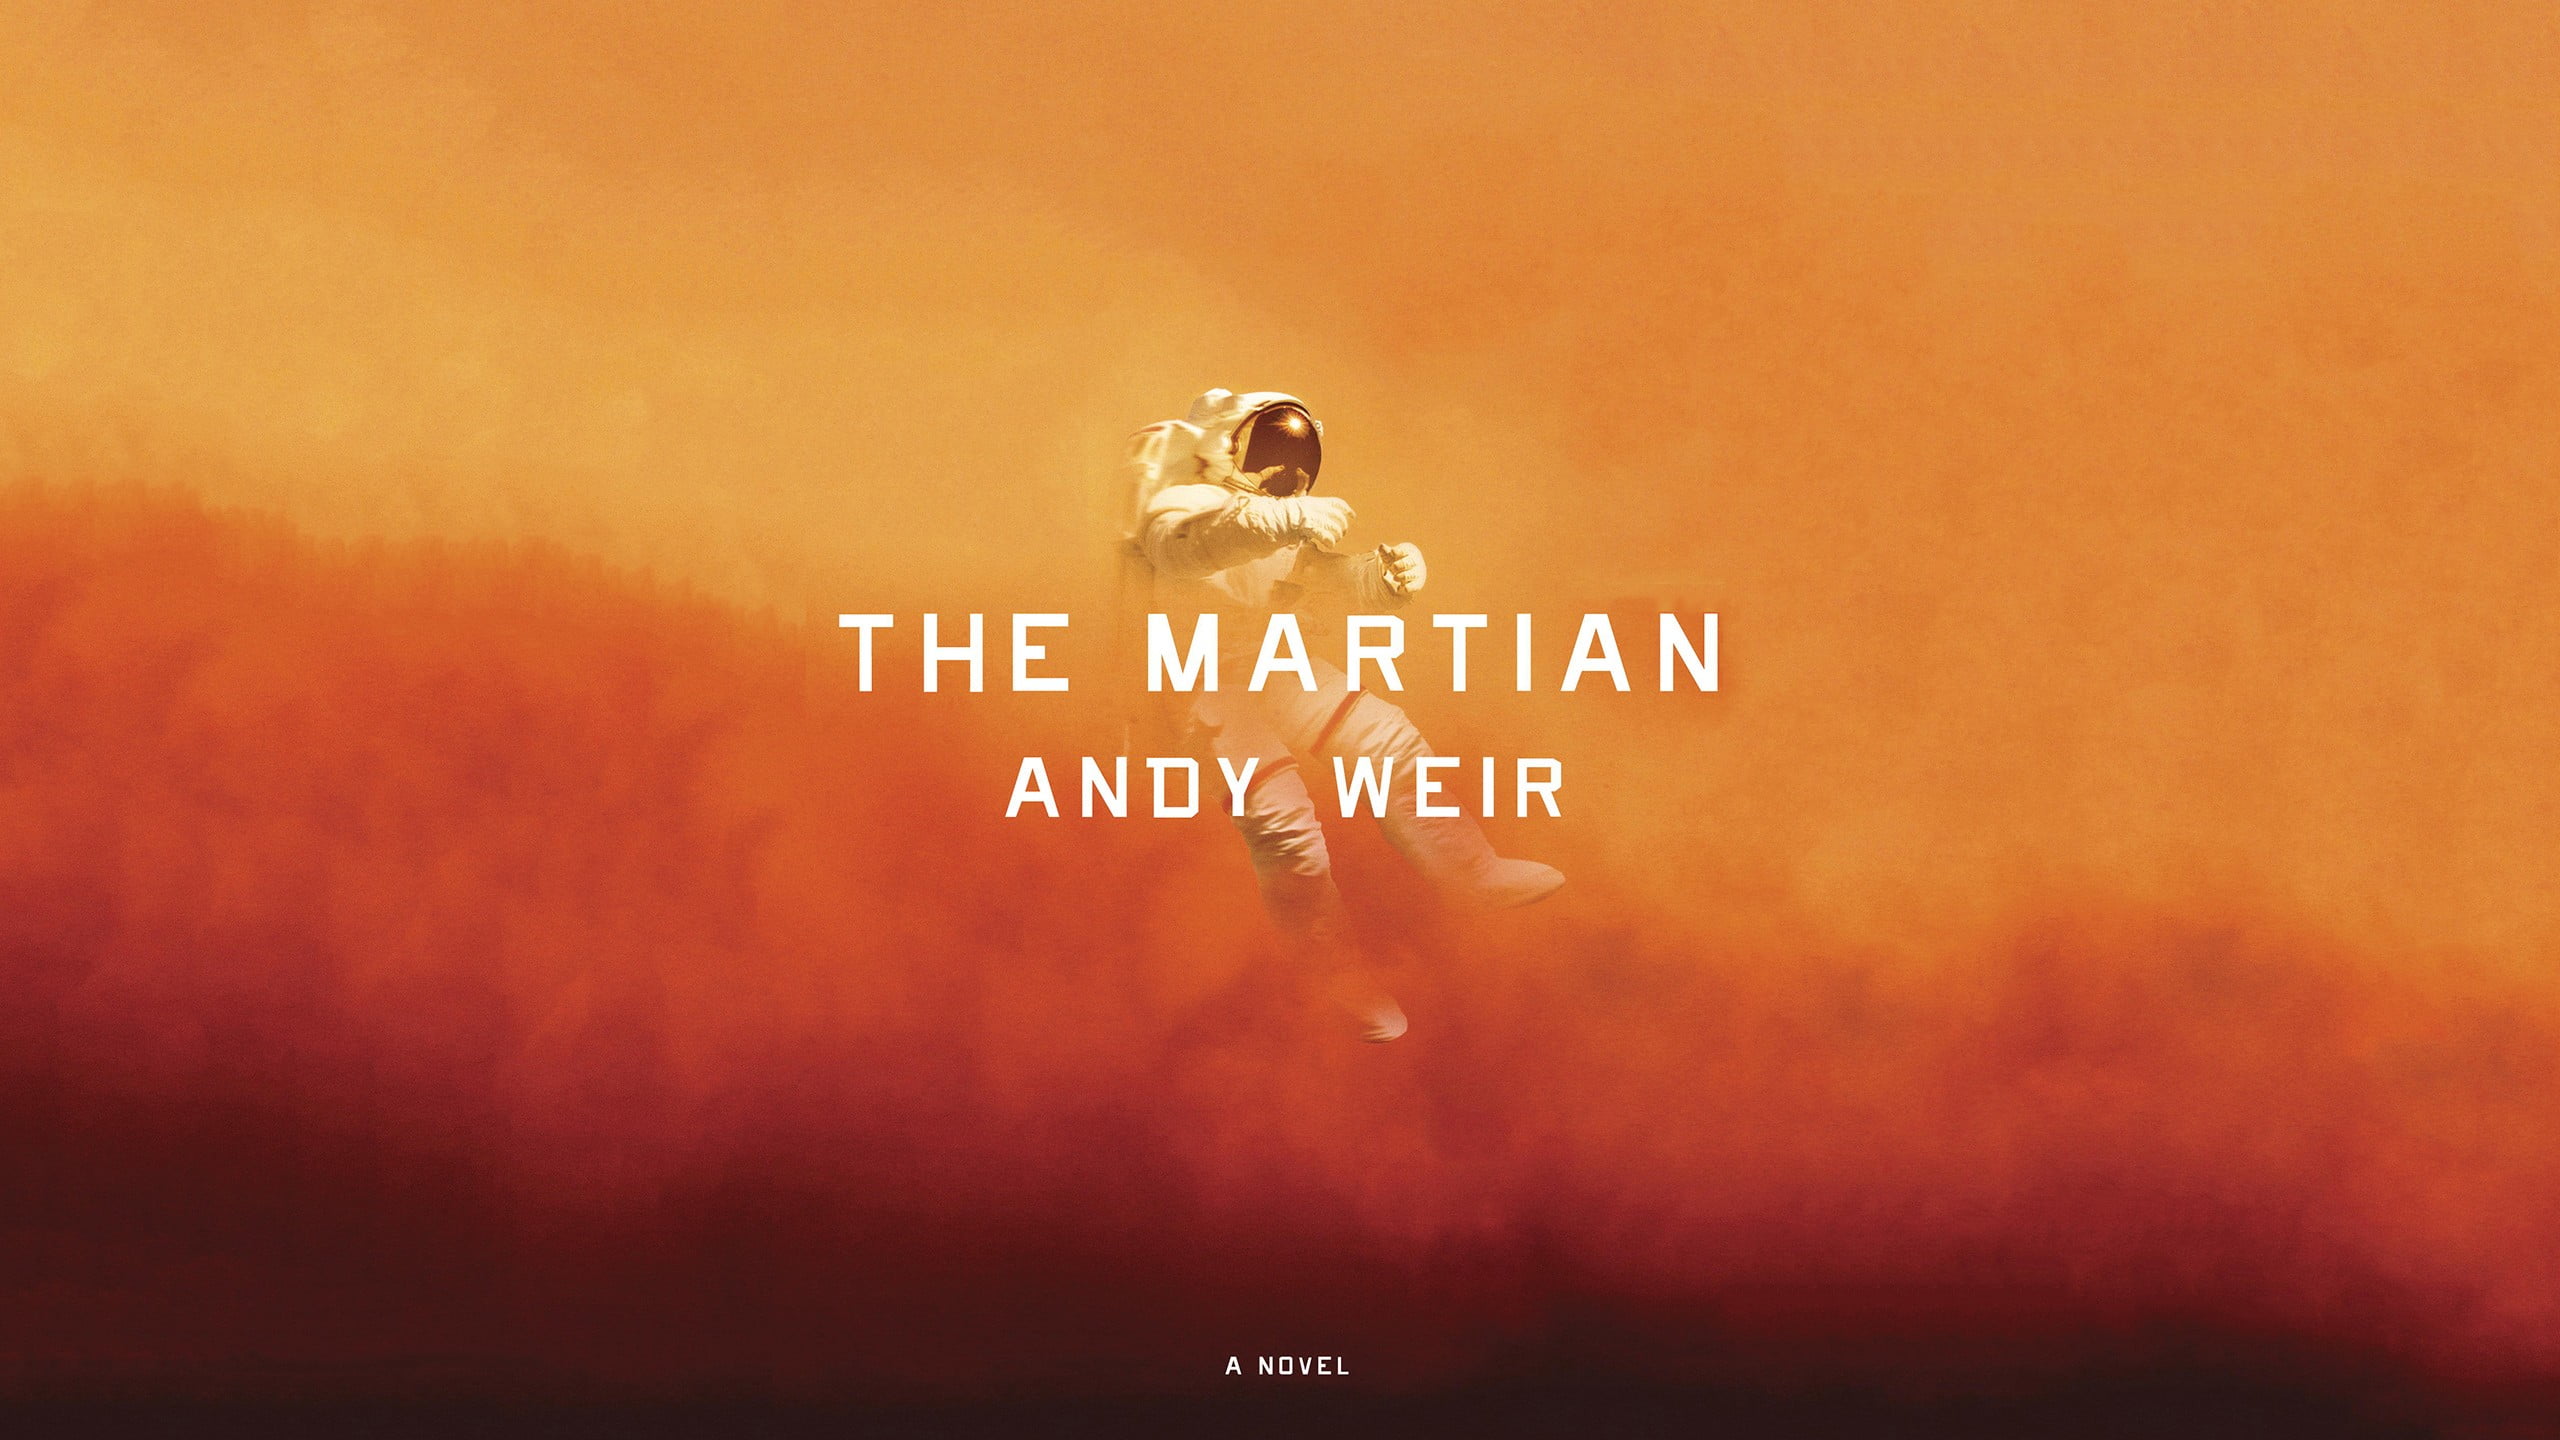 The Martian cover, artwork, astronaut, book cover, no people